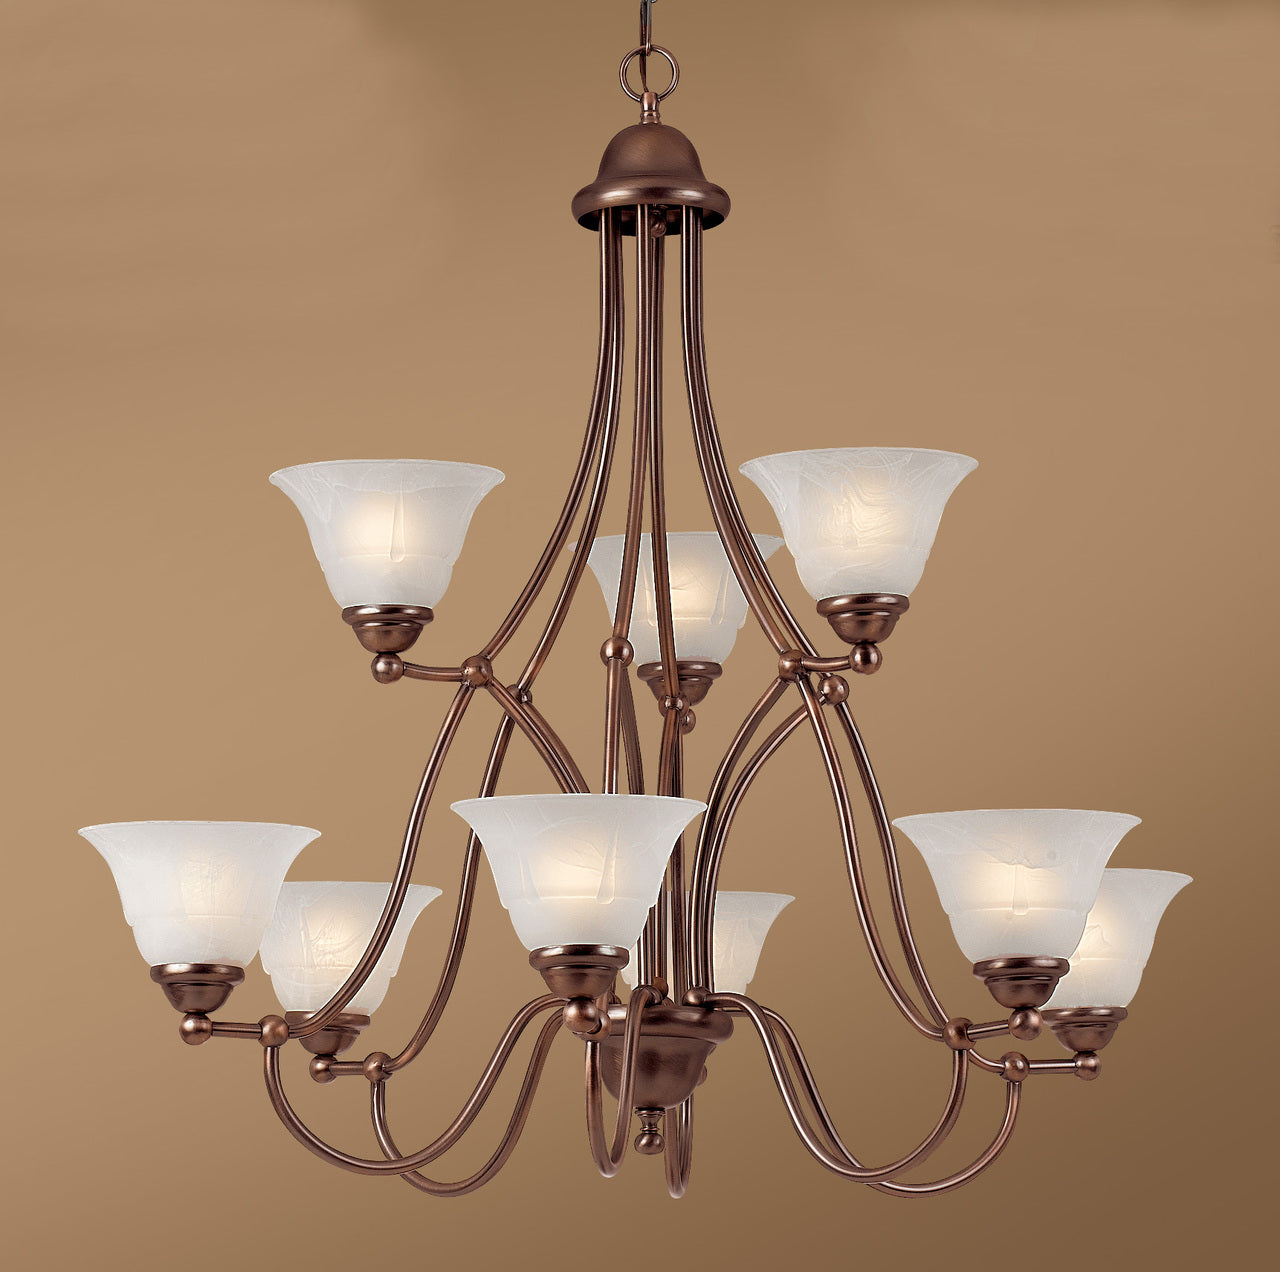 Classic Lighting 69628 ACP TCG Providence Glass/Steel Chandelier in Antique Copper